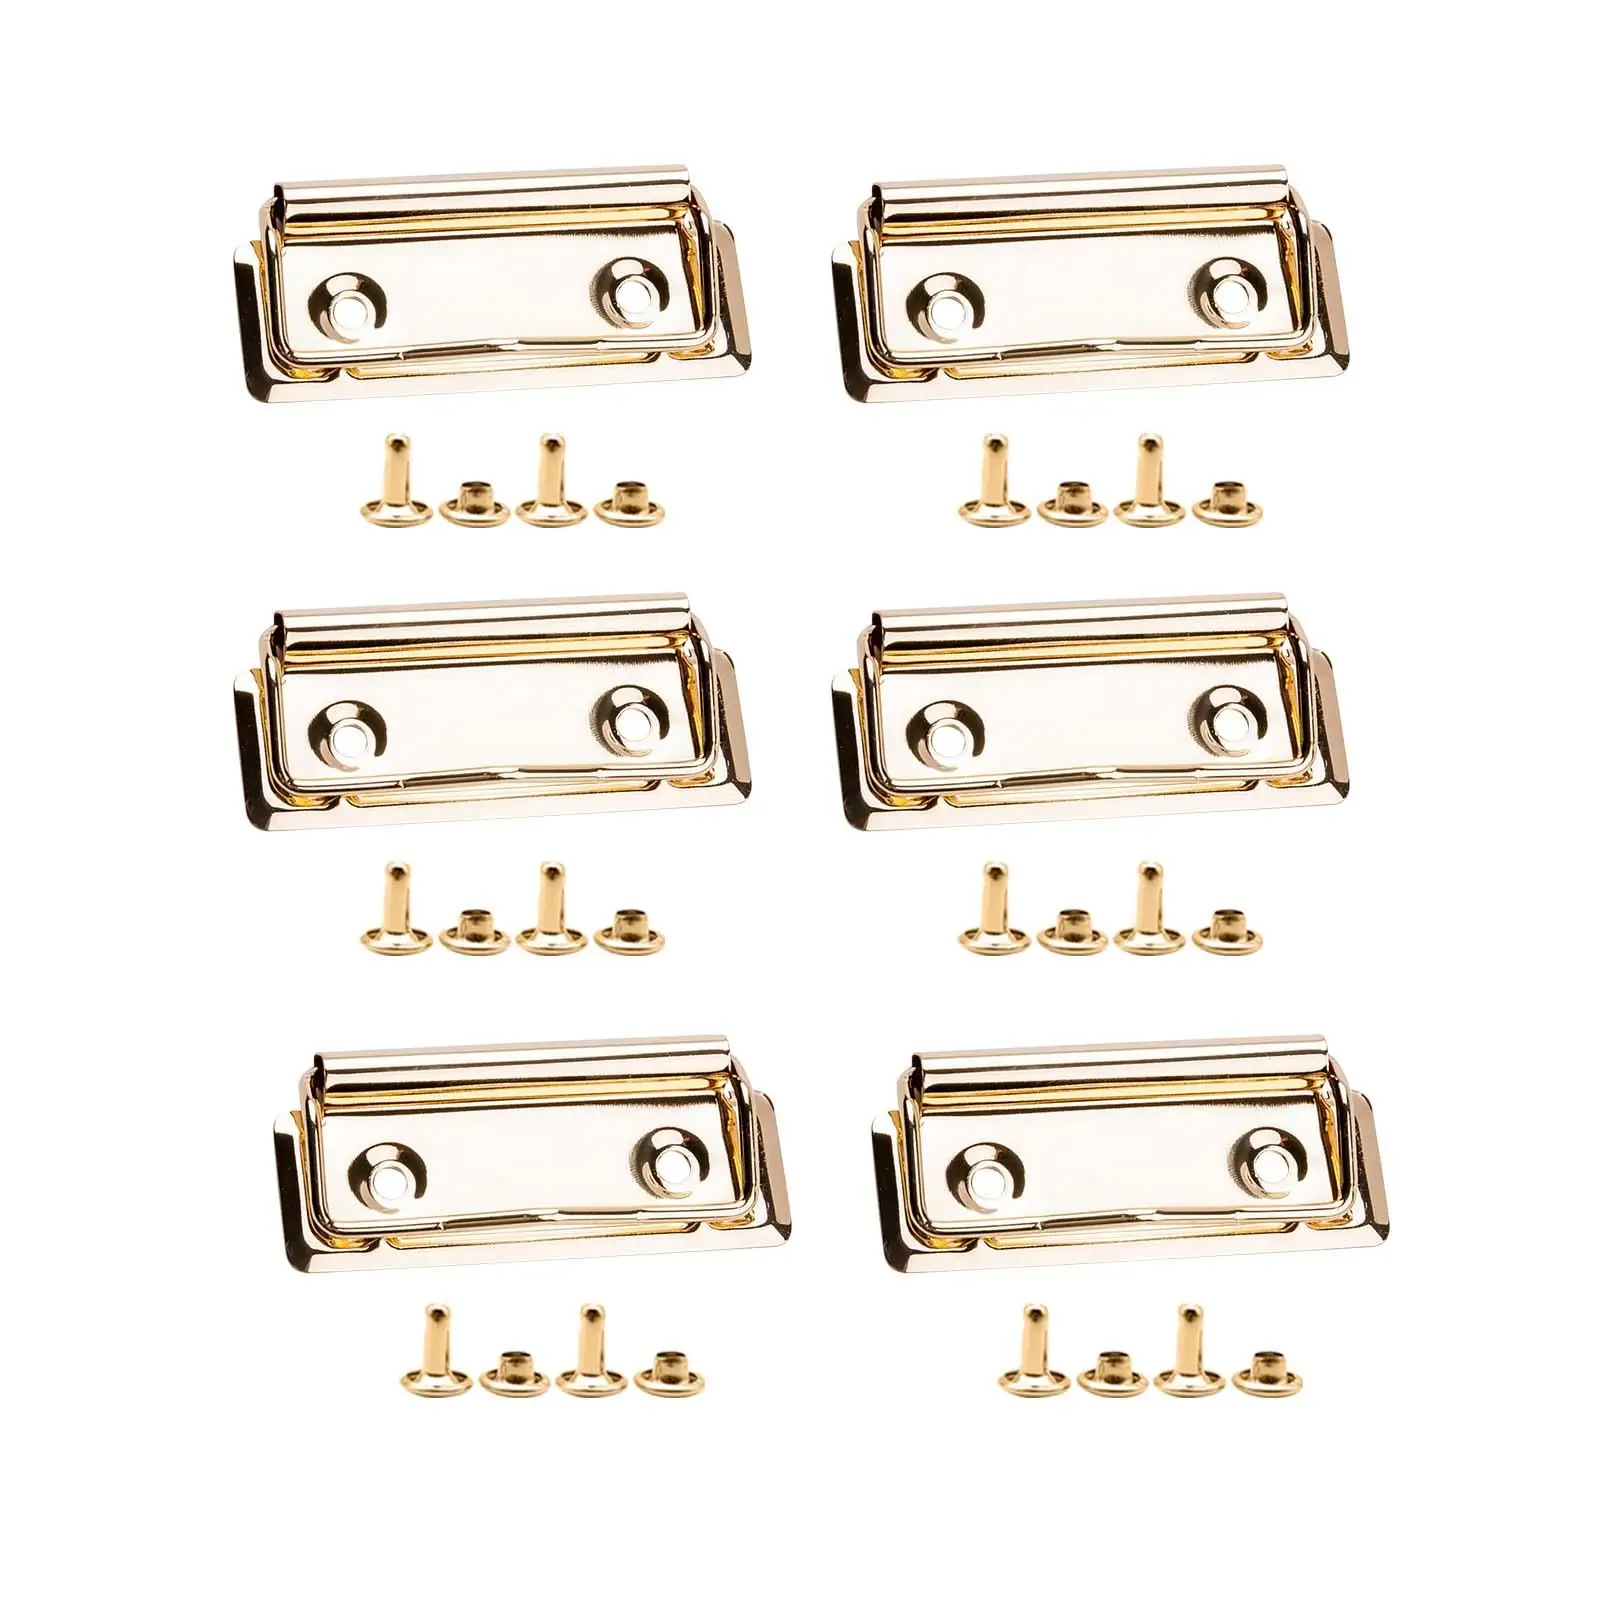 6x Mountable Clipboard Clips Heavy Duty Metal Document File Board Clips Stationery Plate Holder for Stationery Supplies Business